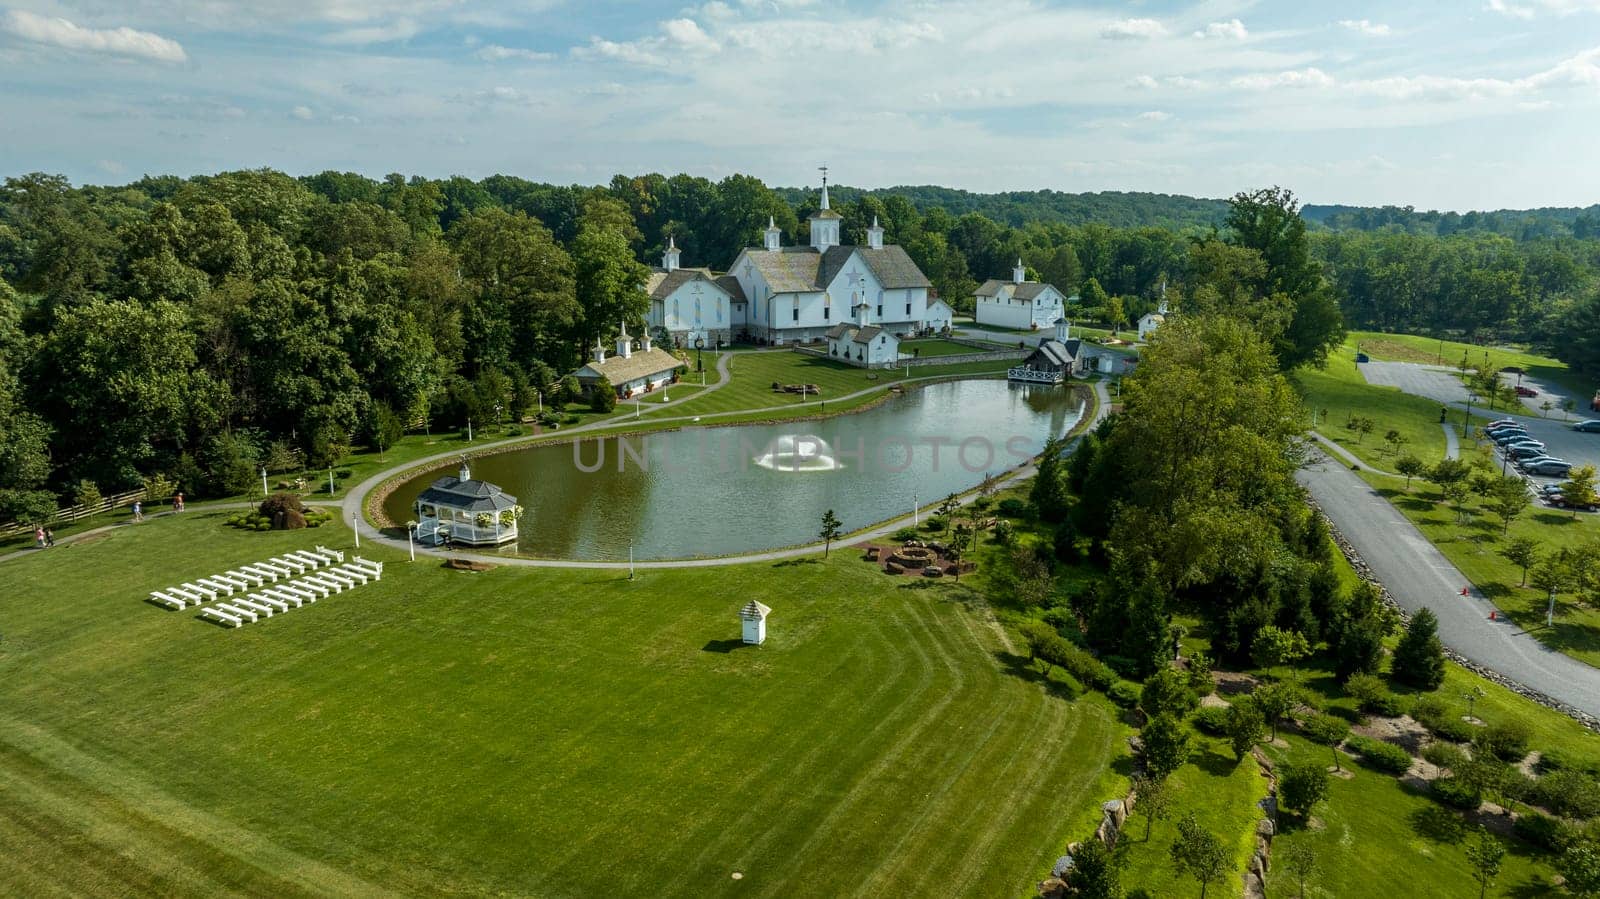 Elizabethtown, Pennsylvania, USA, August 11, 2023 - Aerial View Showcasing A Cluster Of Traditional White Orthodox Churches With Cross-Topped Domes, Arranged Around A Curved Pond With A Fountain, Amidst Green Trees And Neatly Arranged White Benches